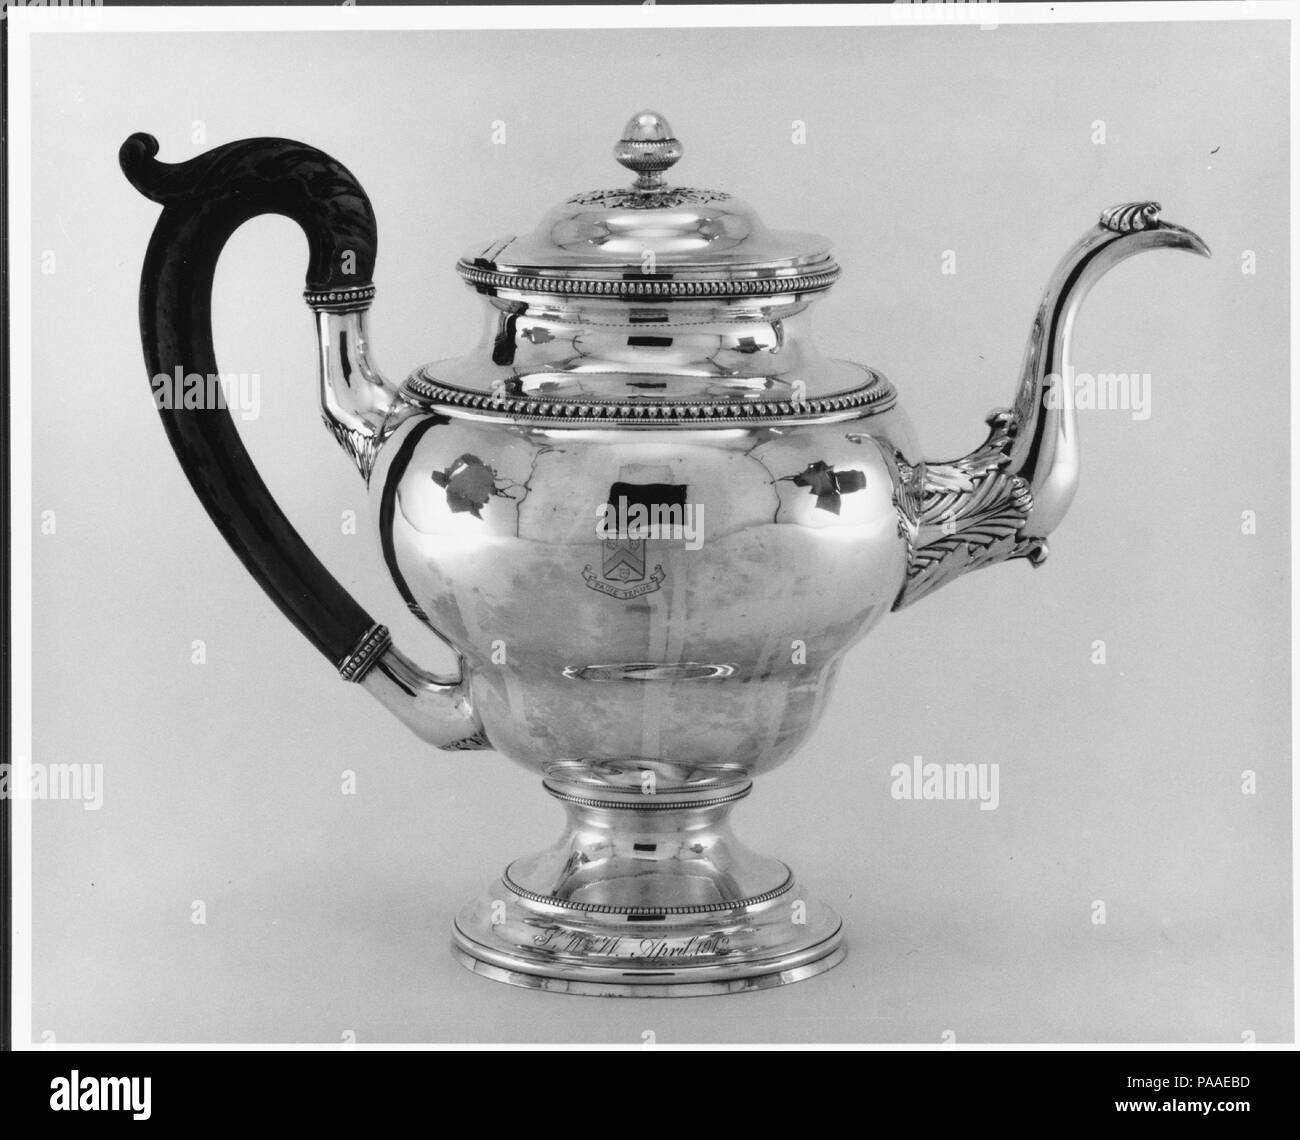 Coffeepot. Culture: American. Dimensions: Overall: 9 7/8 x 13 5/16 x 6 5/8 in. (25.1 x 33.8 x 16.8 cm); 44 oz. 12 dwt. (1387 g)  Foot: Diam. 4 13/16 in. (12.2 cm). Maker: Harvey Lewis (ca. 1783-1835). Date: 1827. Museum: Metropolitan Museum of Art, New York, USA. Stock Photo